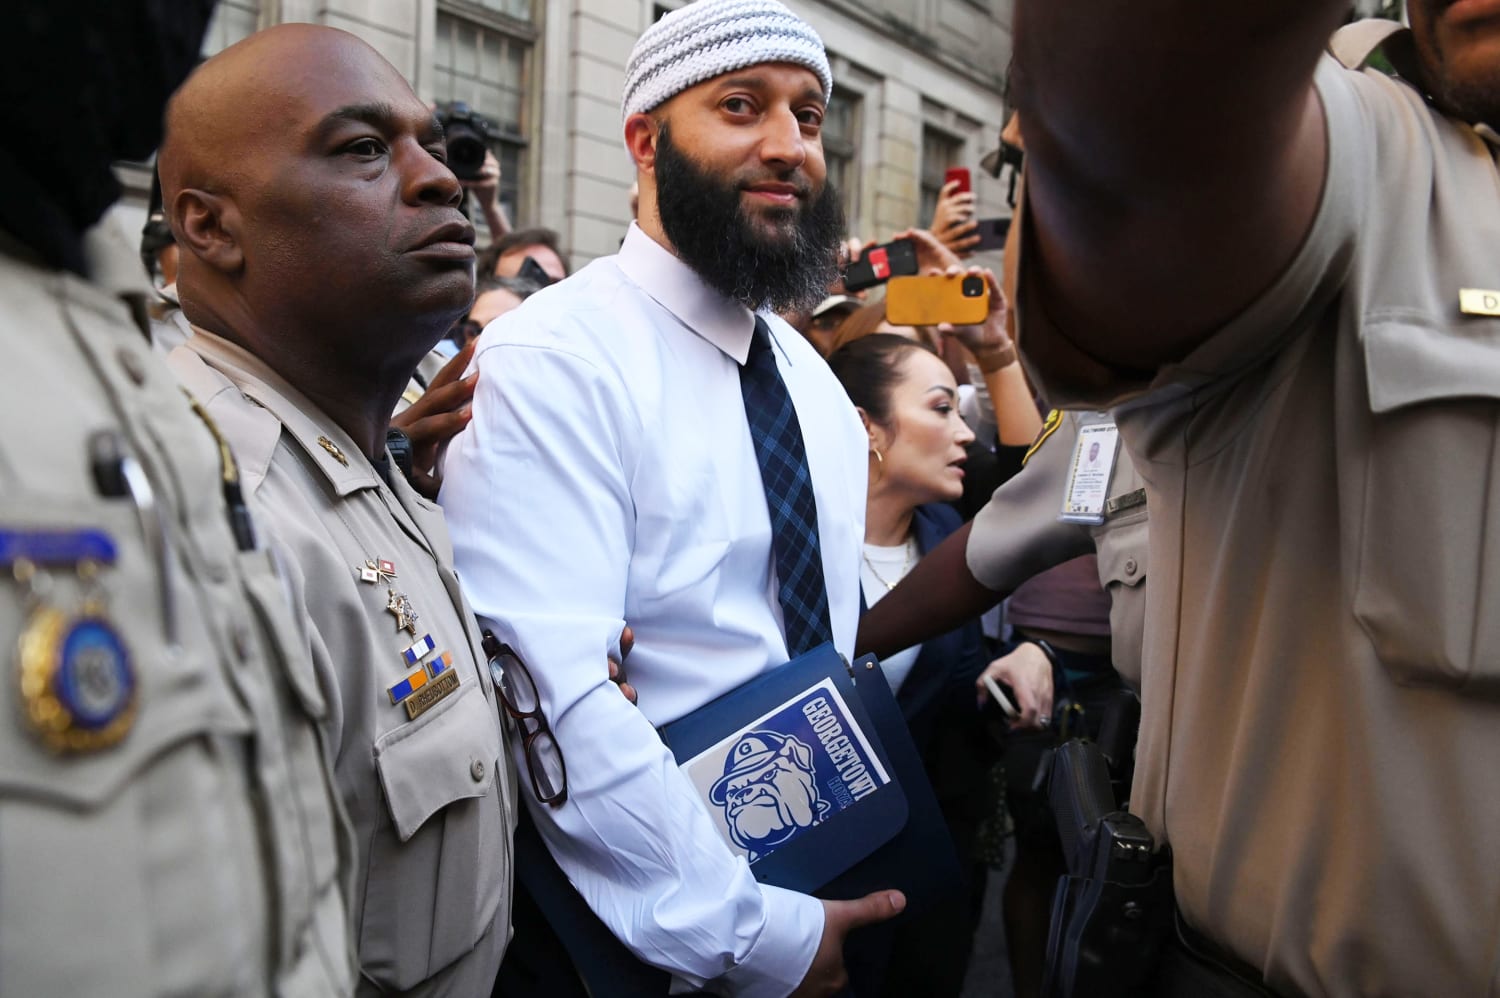 Adnan Syed's court trial shaped by racial stereotypes, experts say